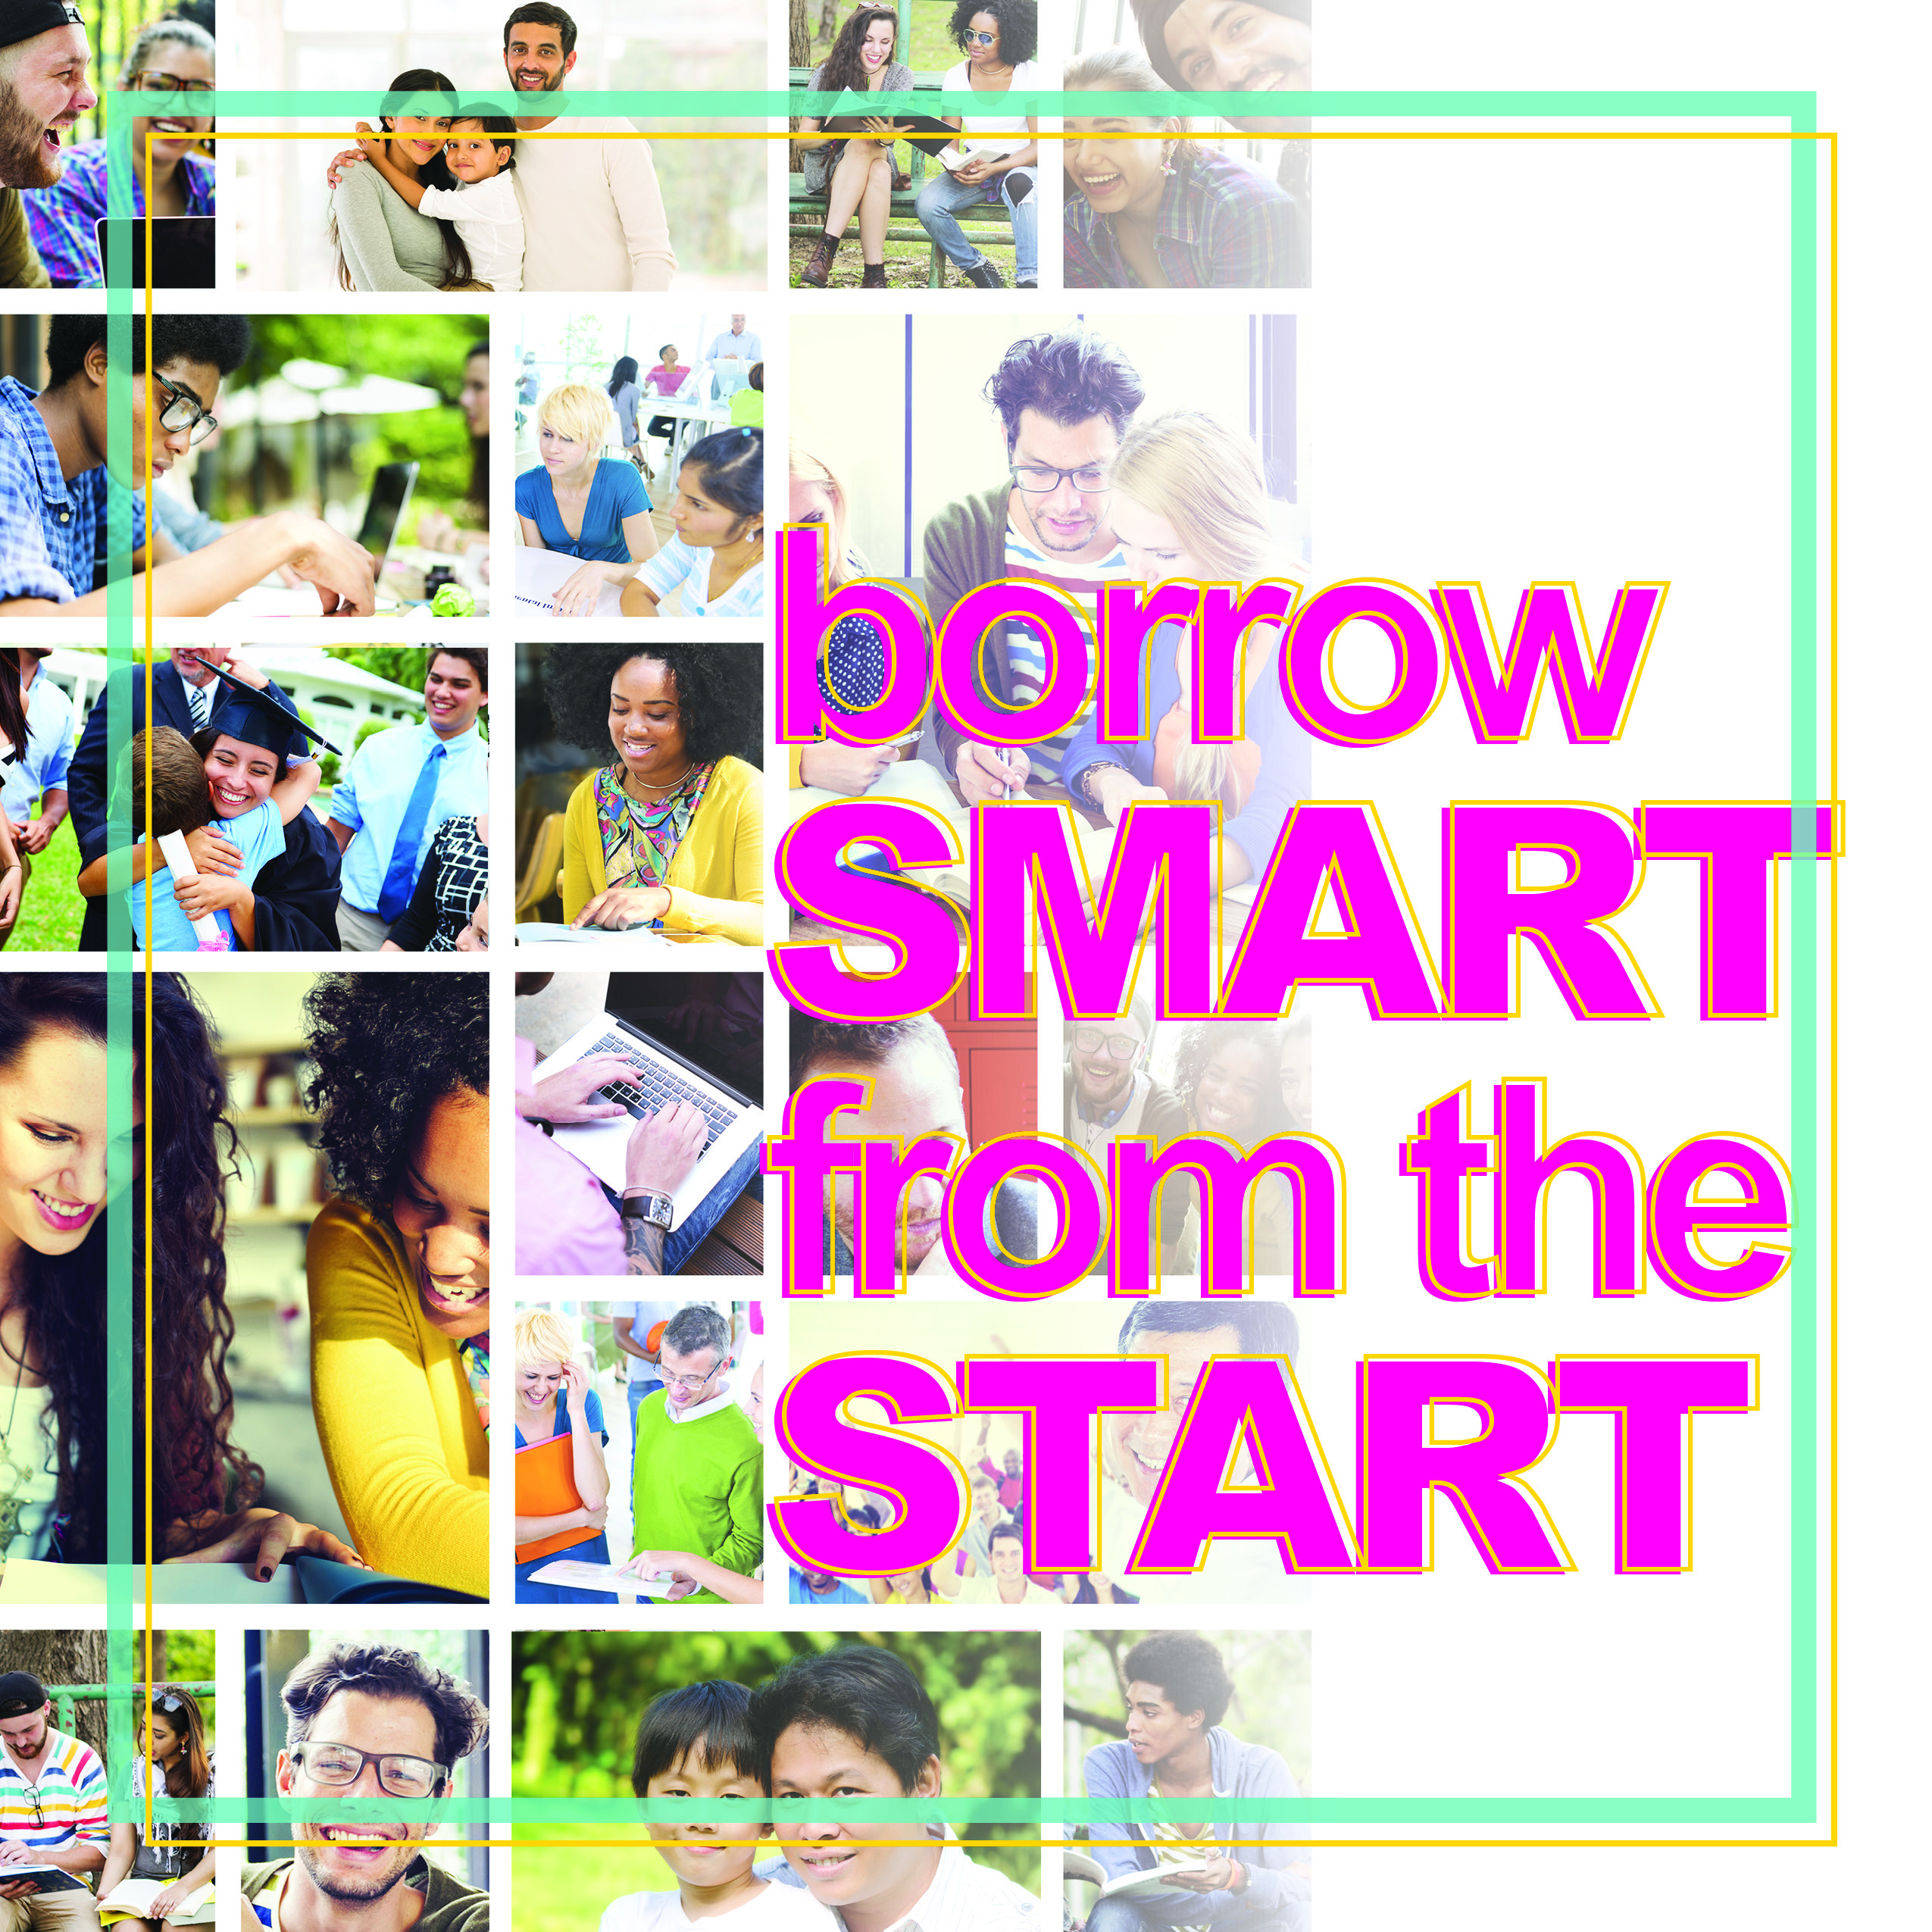 Borrpow Smart from the Start Brochure opens at ReadySetRepay.org